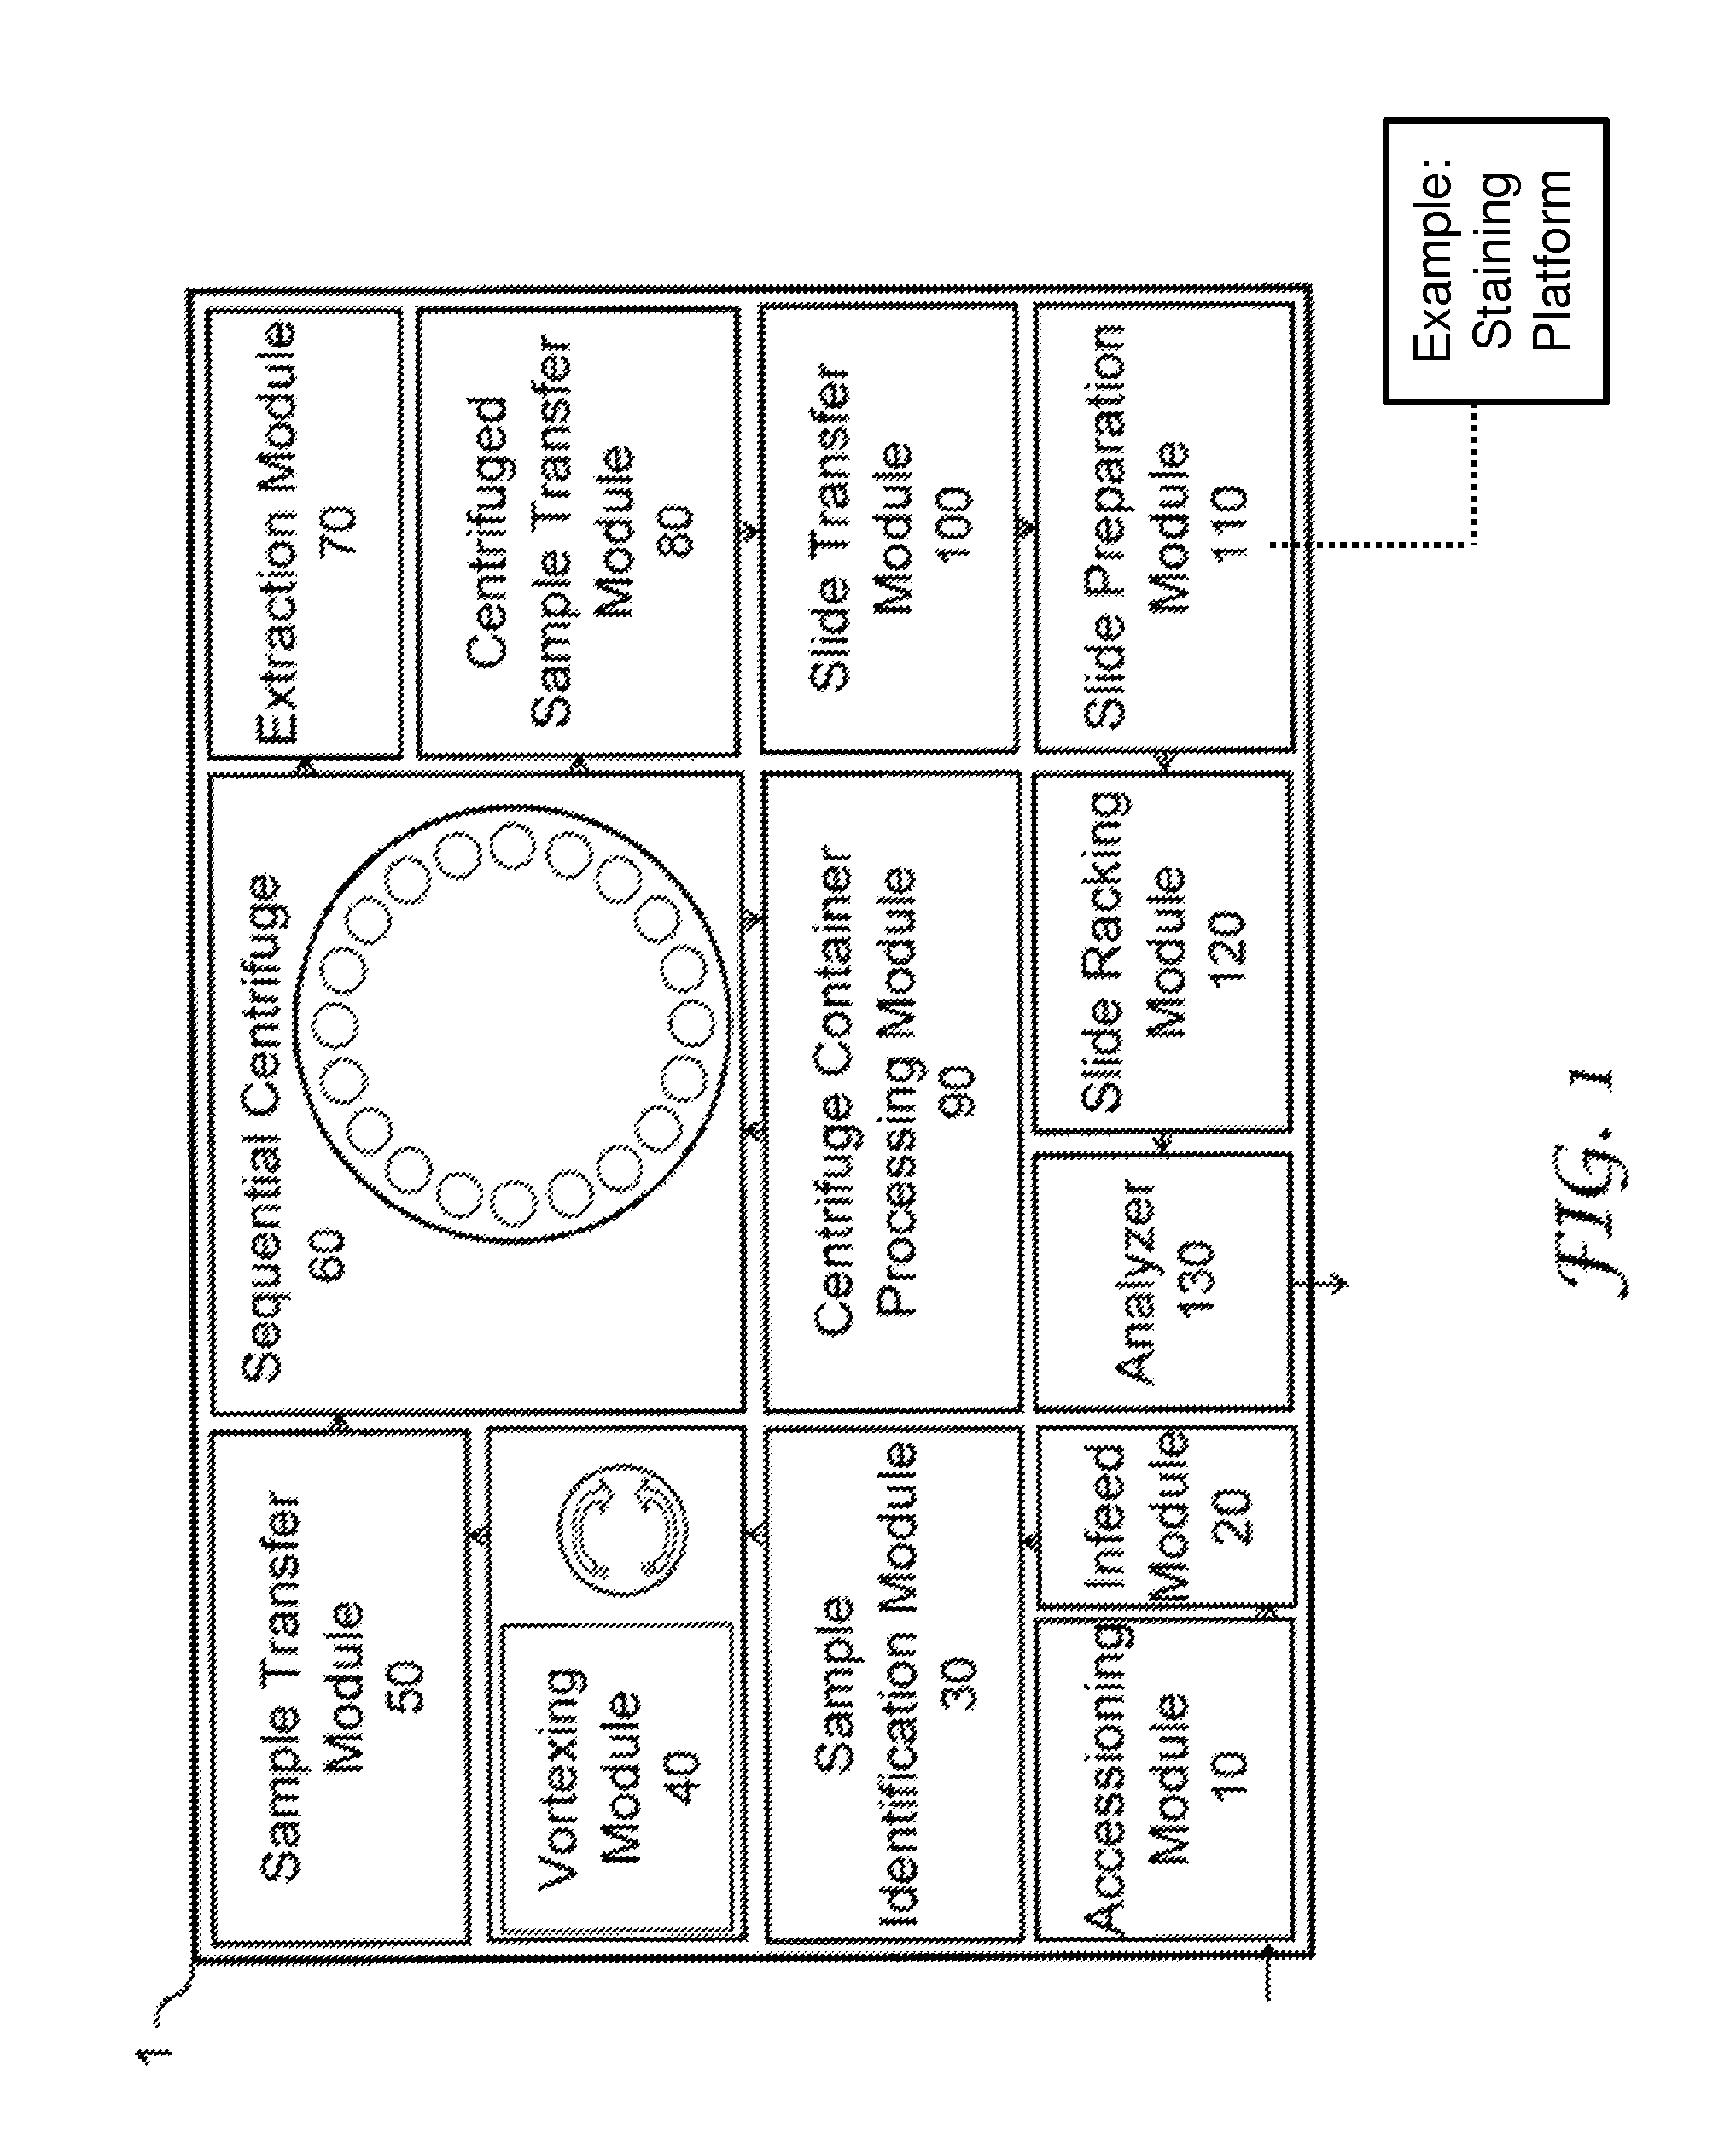 Integrated sequential sample preparation system